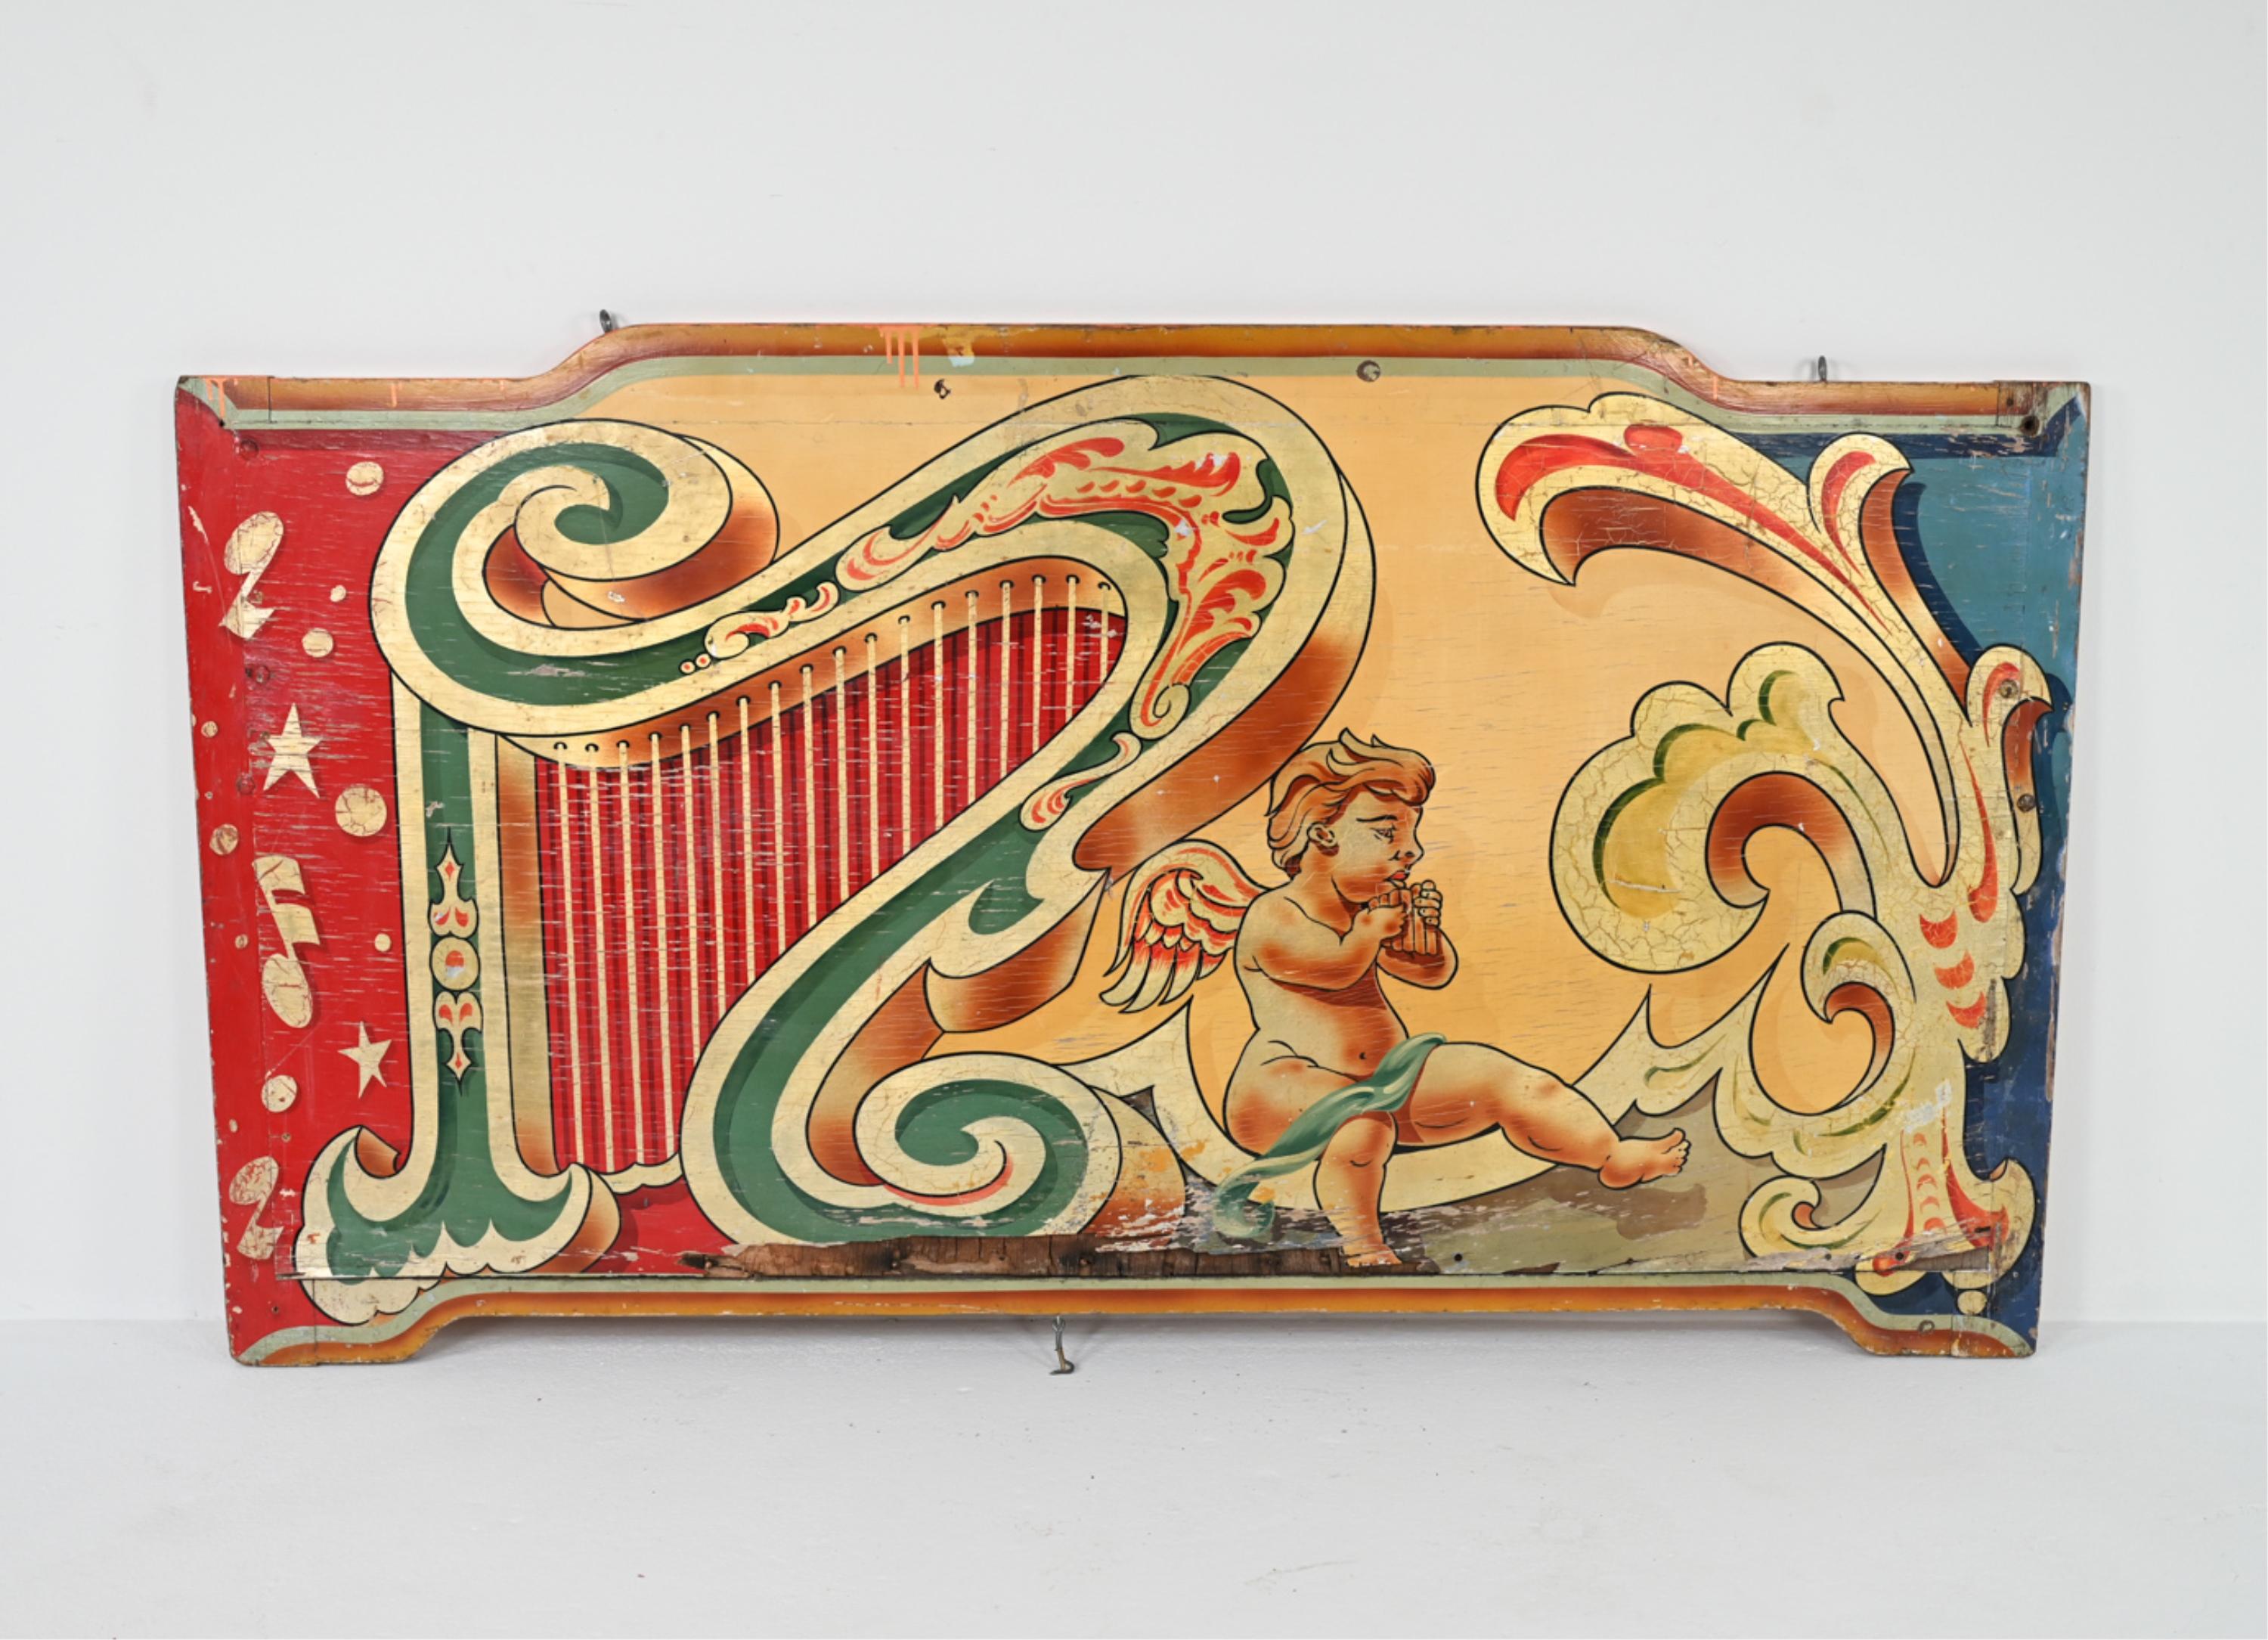 Bring an unusual piece of folk history into your home with this stunning early 20th century rounding board salvaged from a carnival. With hand-painted designs of putti and harp motifs and gold leaf pigment, this board is a whimsical, decorative